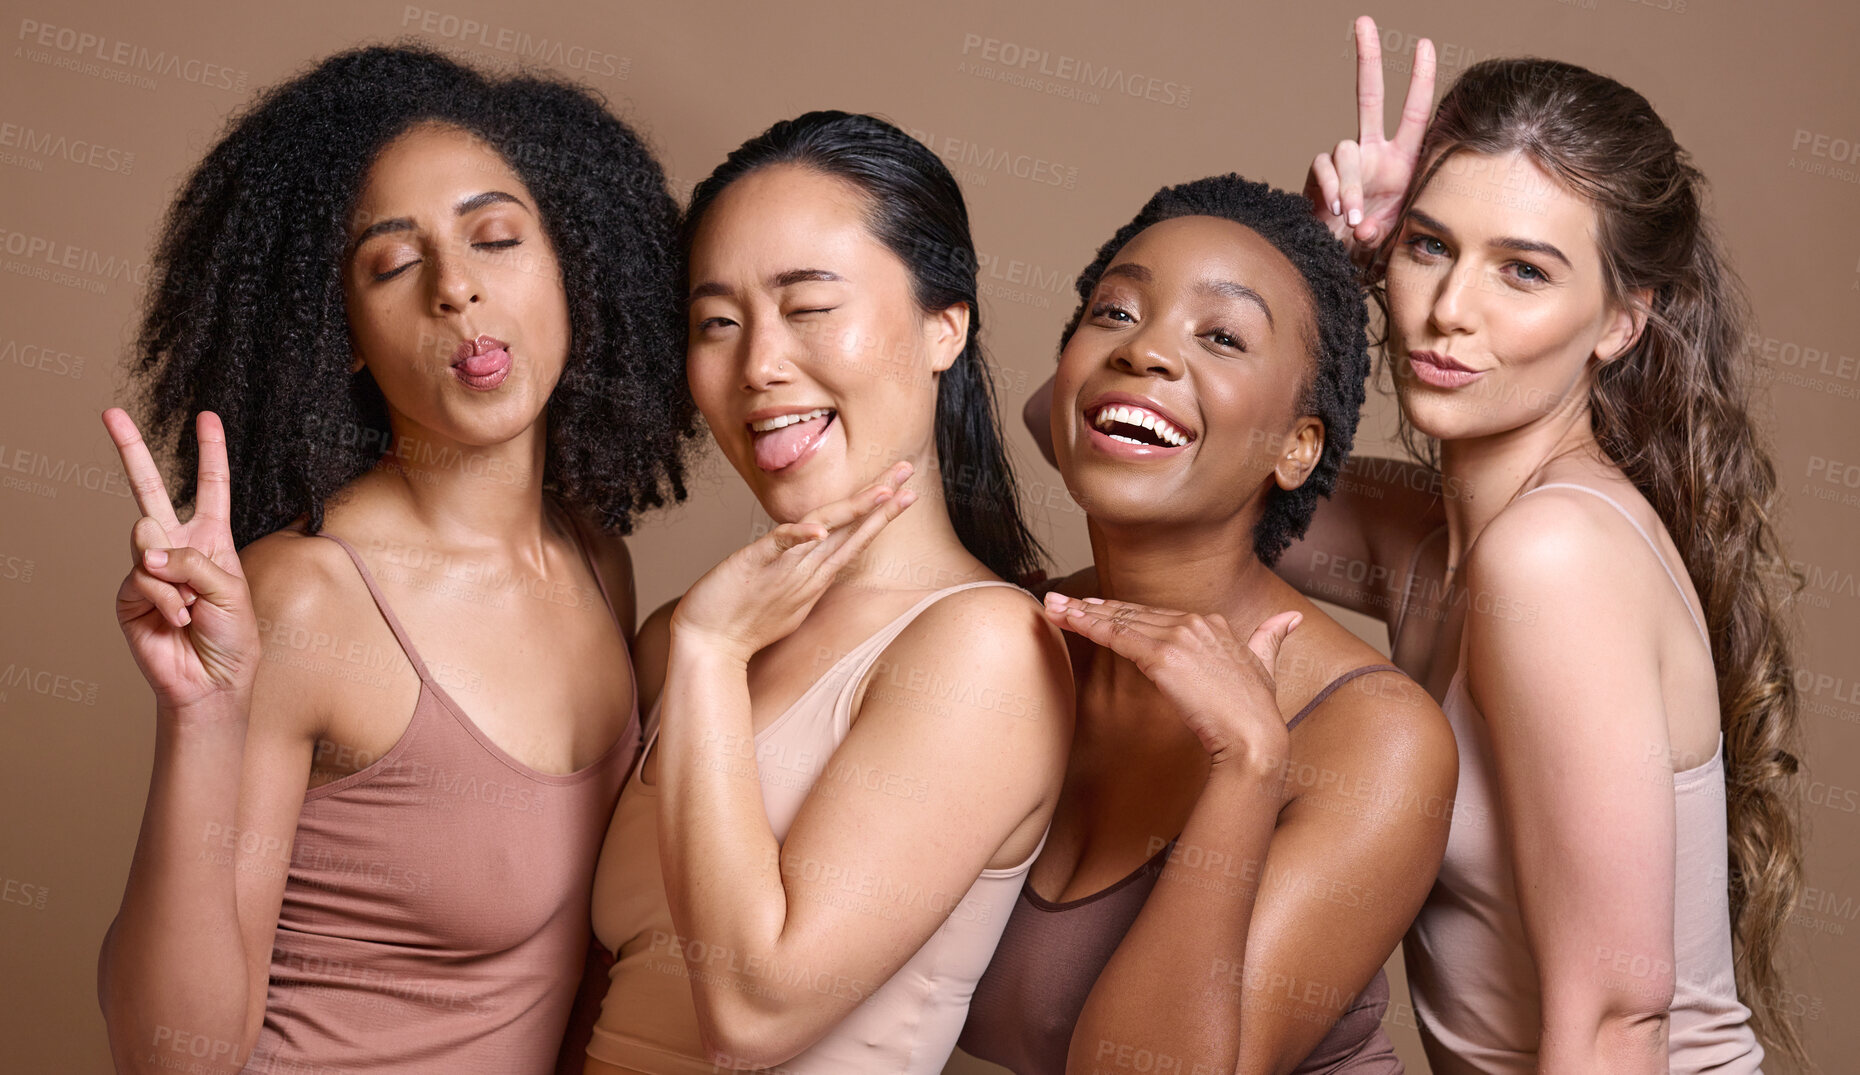 Buy stock photo Diversity, peace sign and smile, portrait of women in underwear with body positivity on studio background. Beauty, friends and empowerment in self love, friendship and care group of diverse ladies.